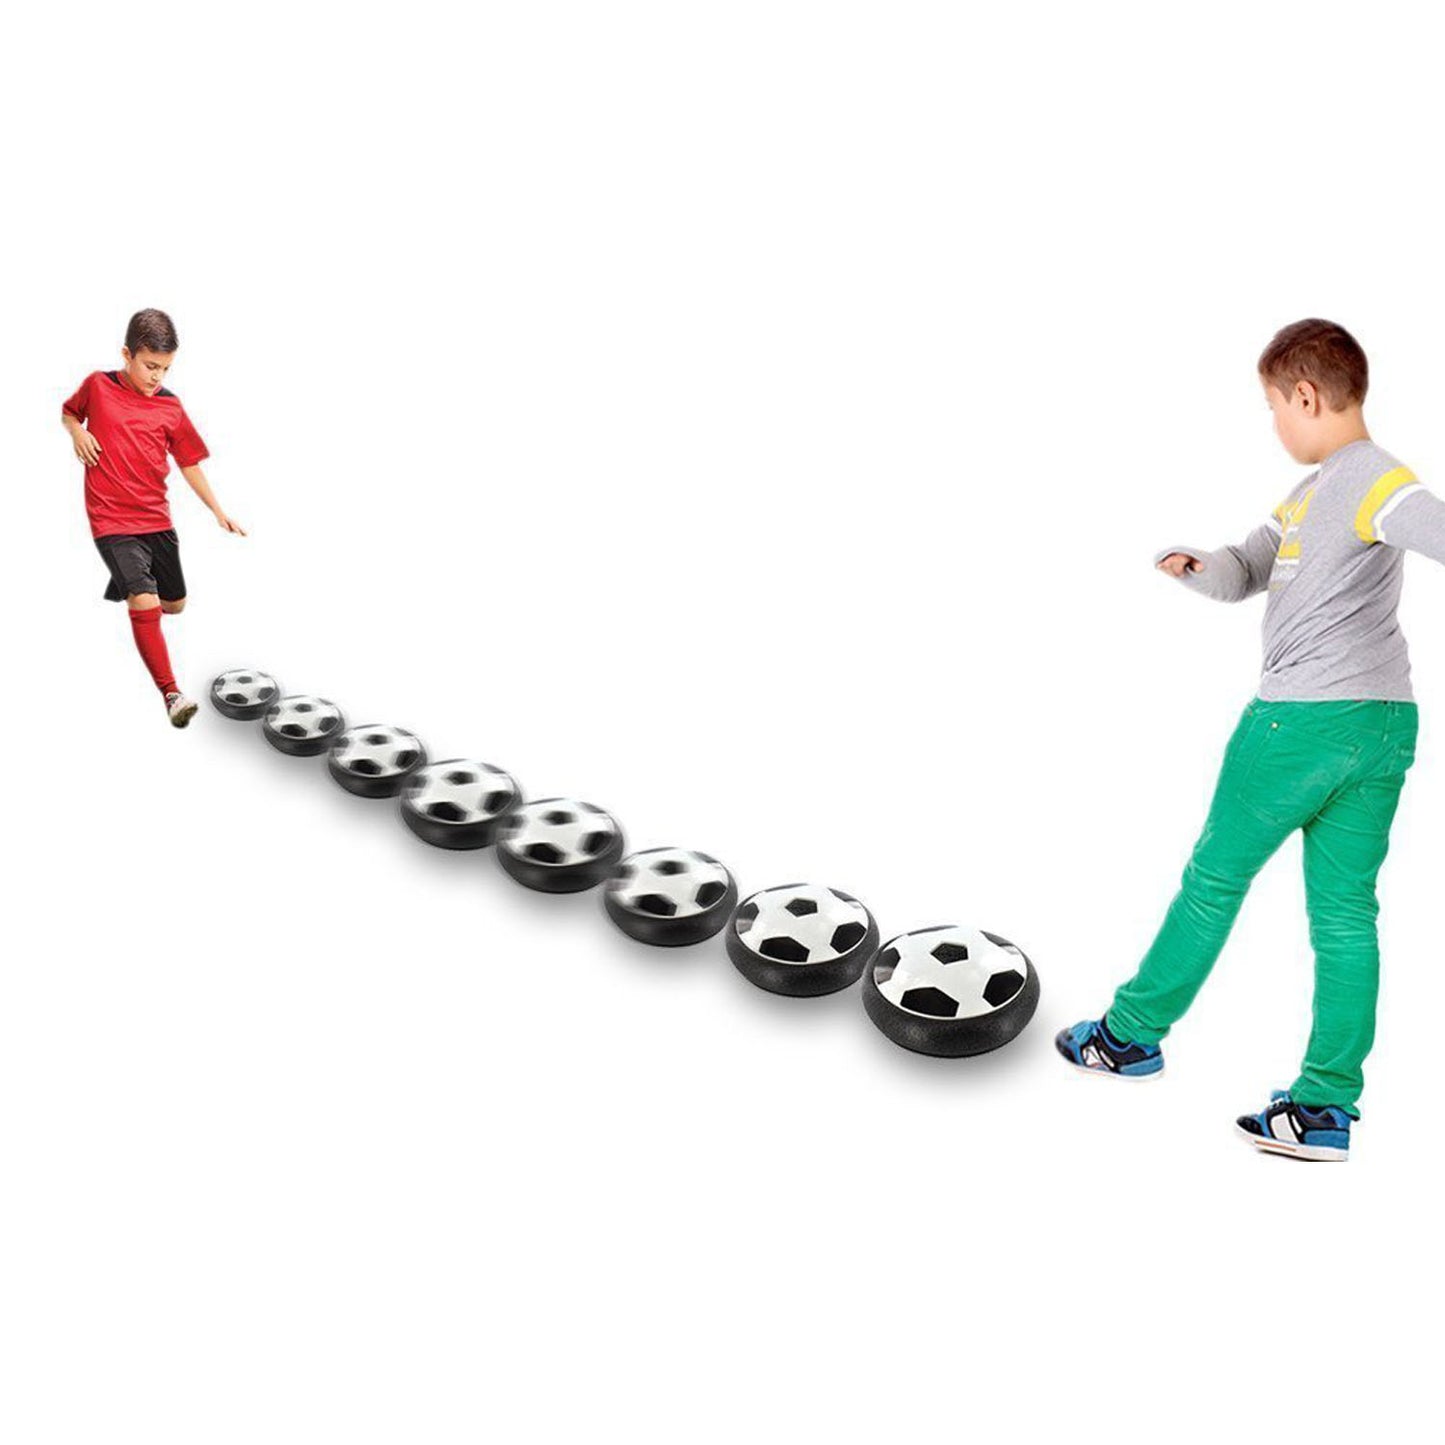 Hover soccer ball | with Foam Bumpers and Colorful LED Lights | hover ball